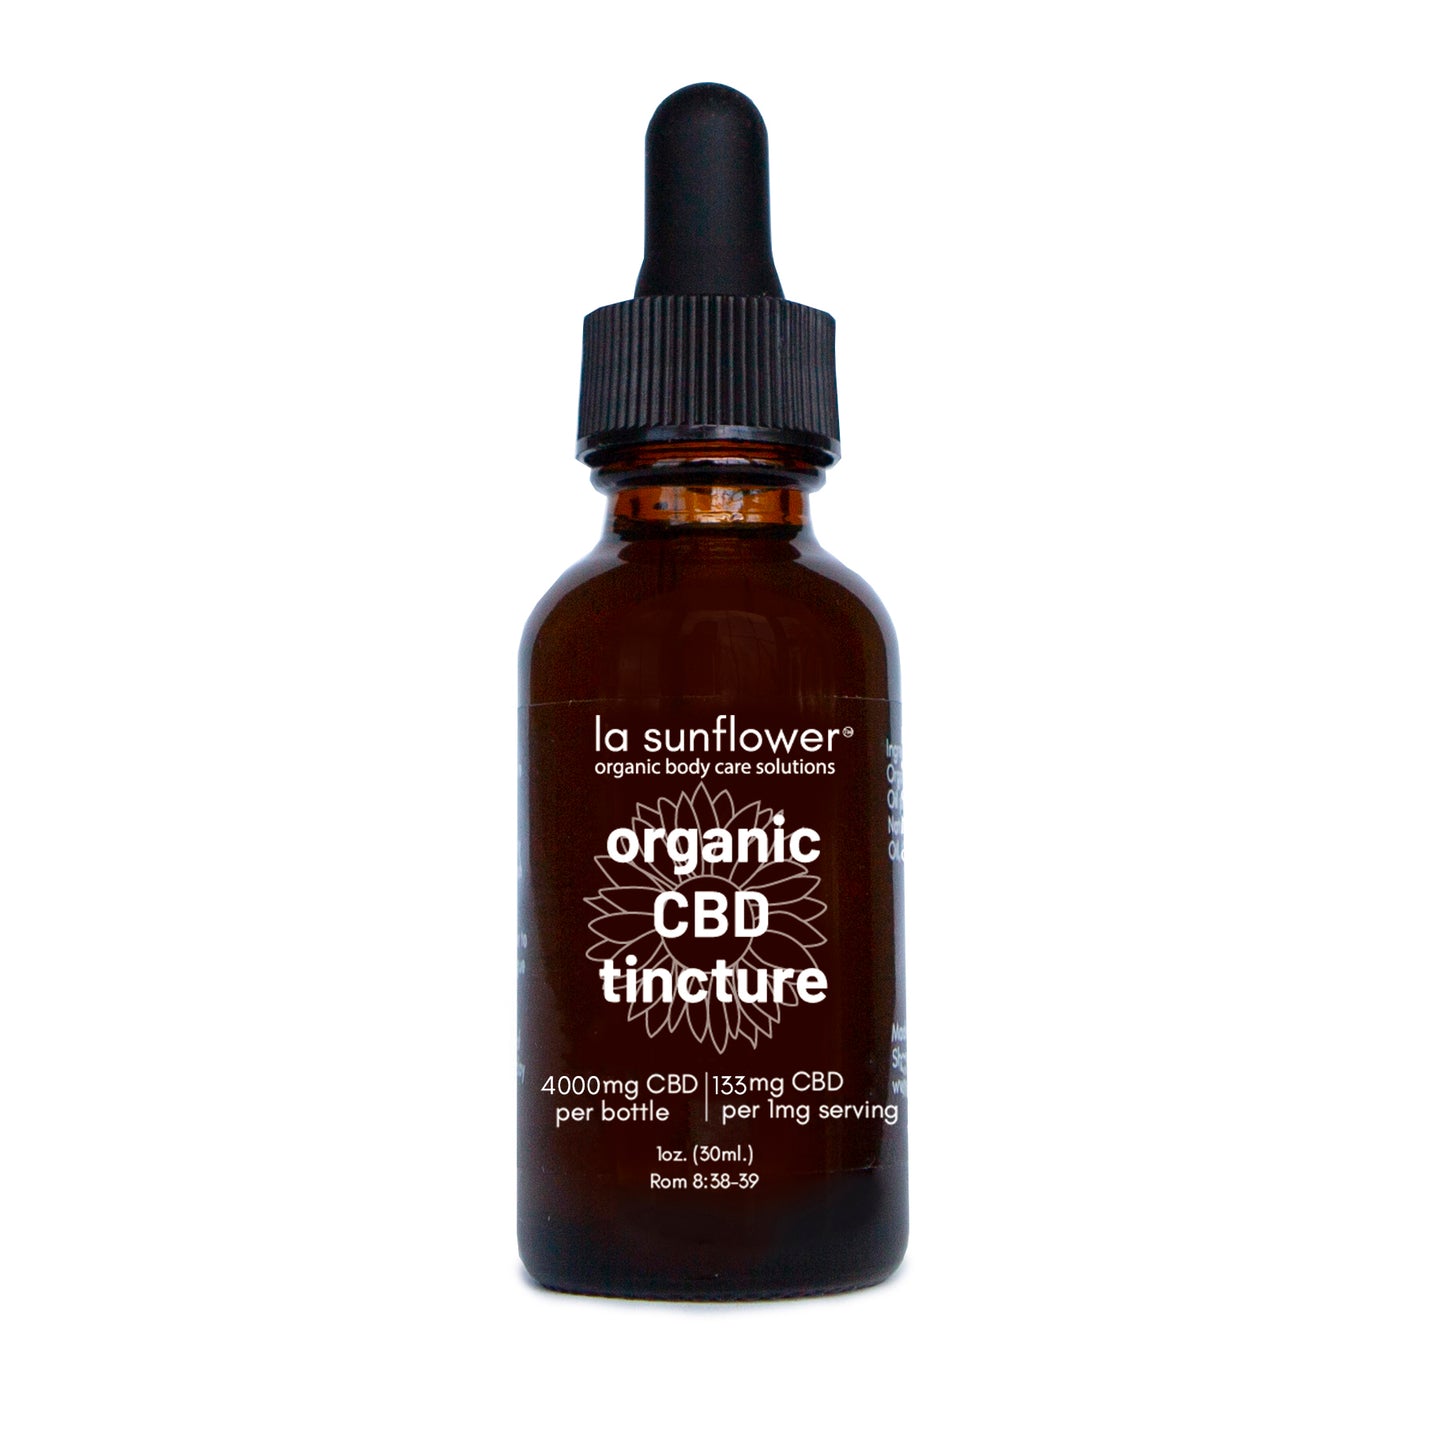 4000mg. CBD Full Spectrum Tincture: Formulated To Help Address Chronic Pain, Inflammation, Anxiety & Restlessness